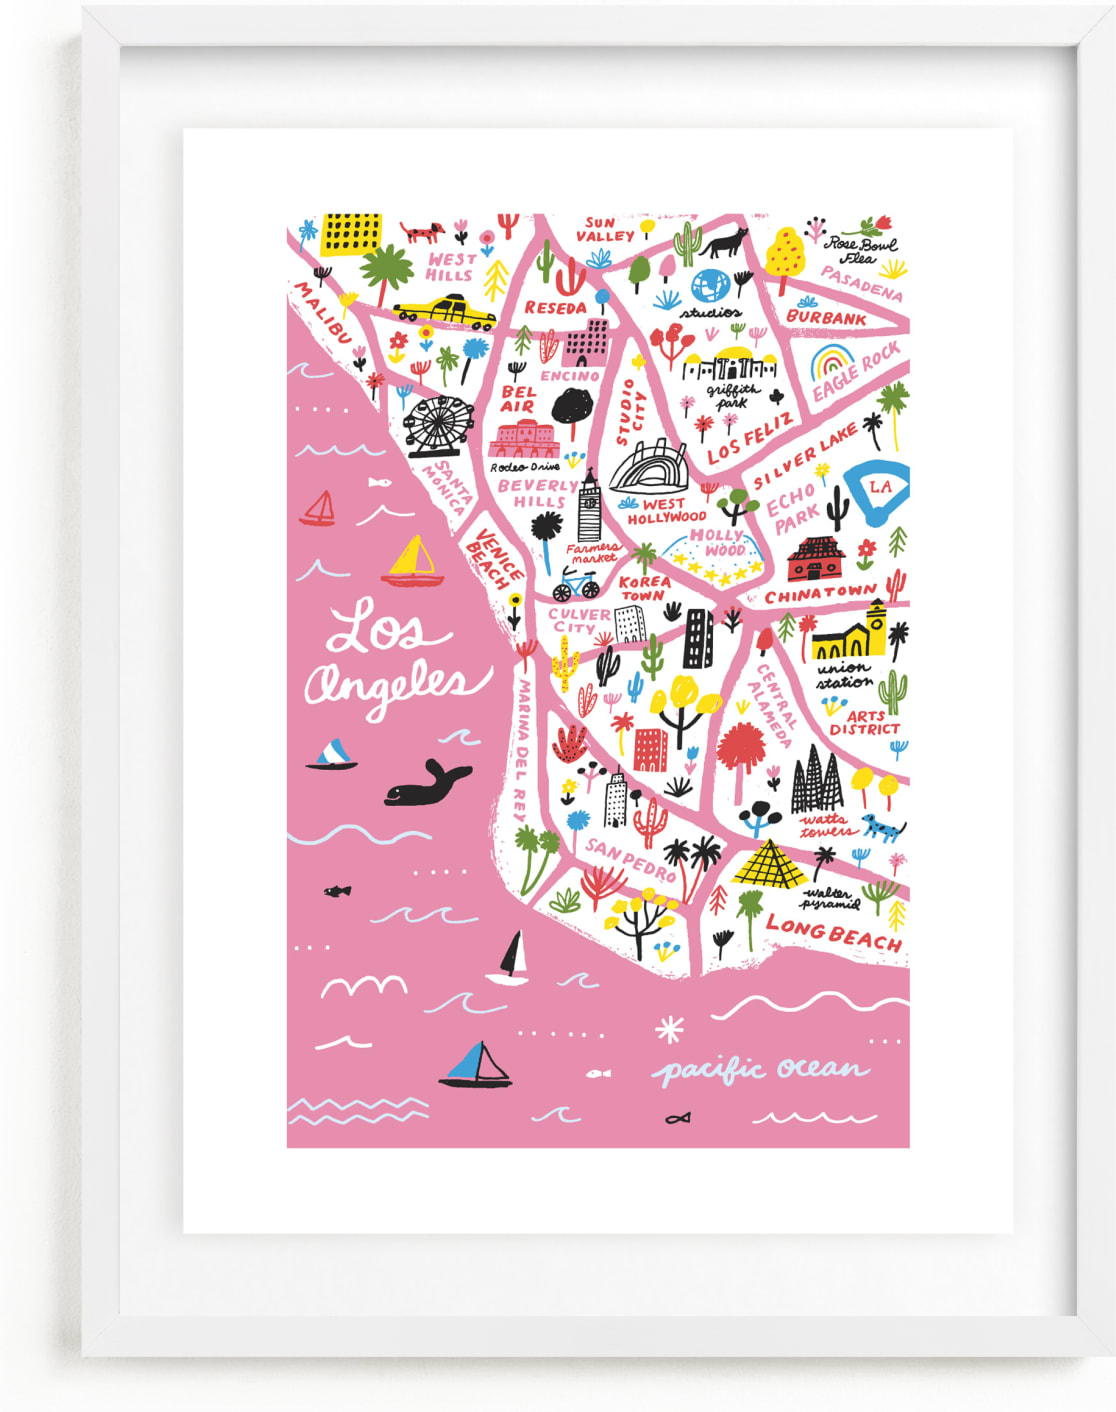 This is a colorful, pink art by Jordan Sondler called I Love Los Angeles.